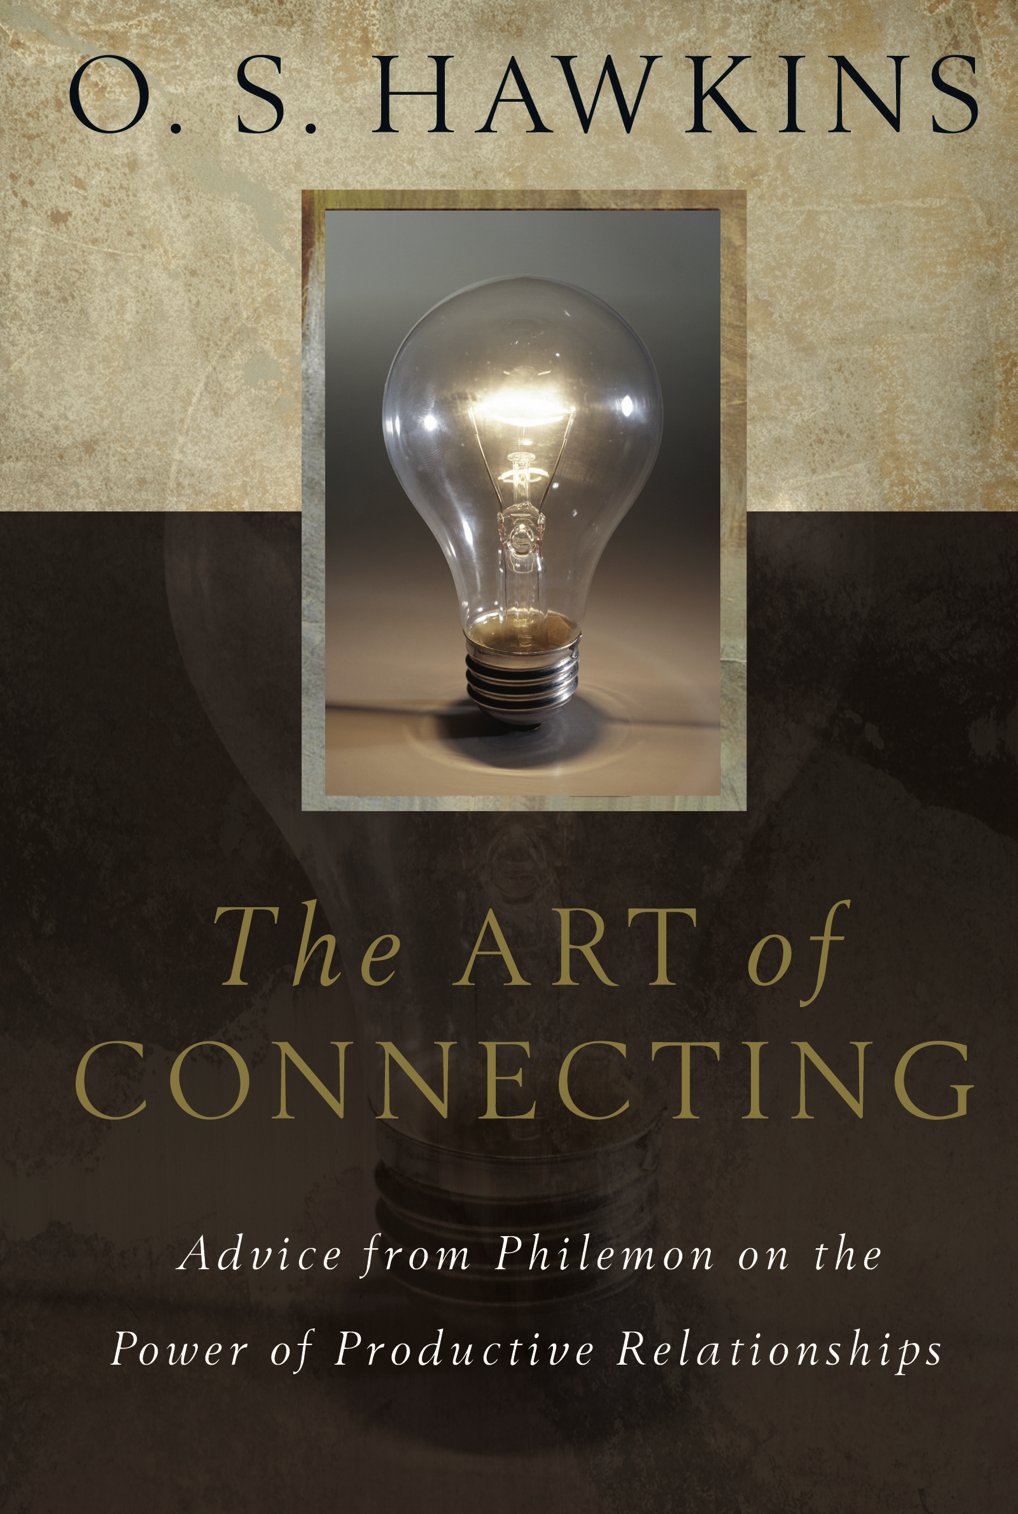 THE ART OF CONNECTING